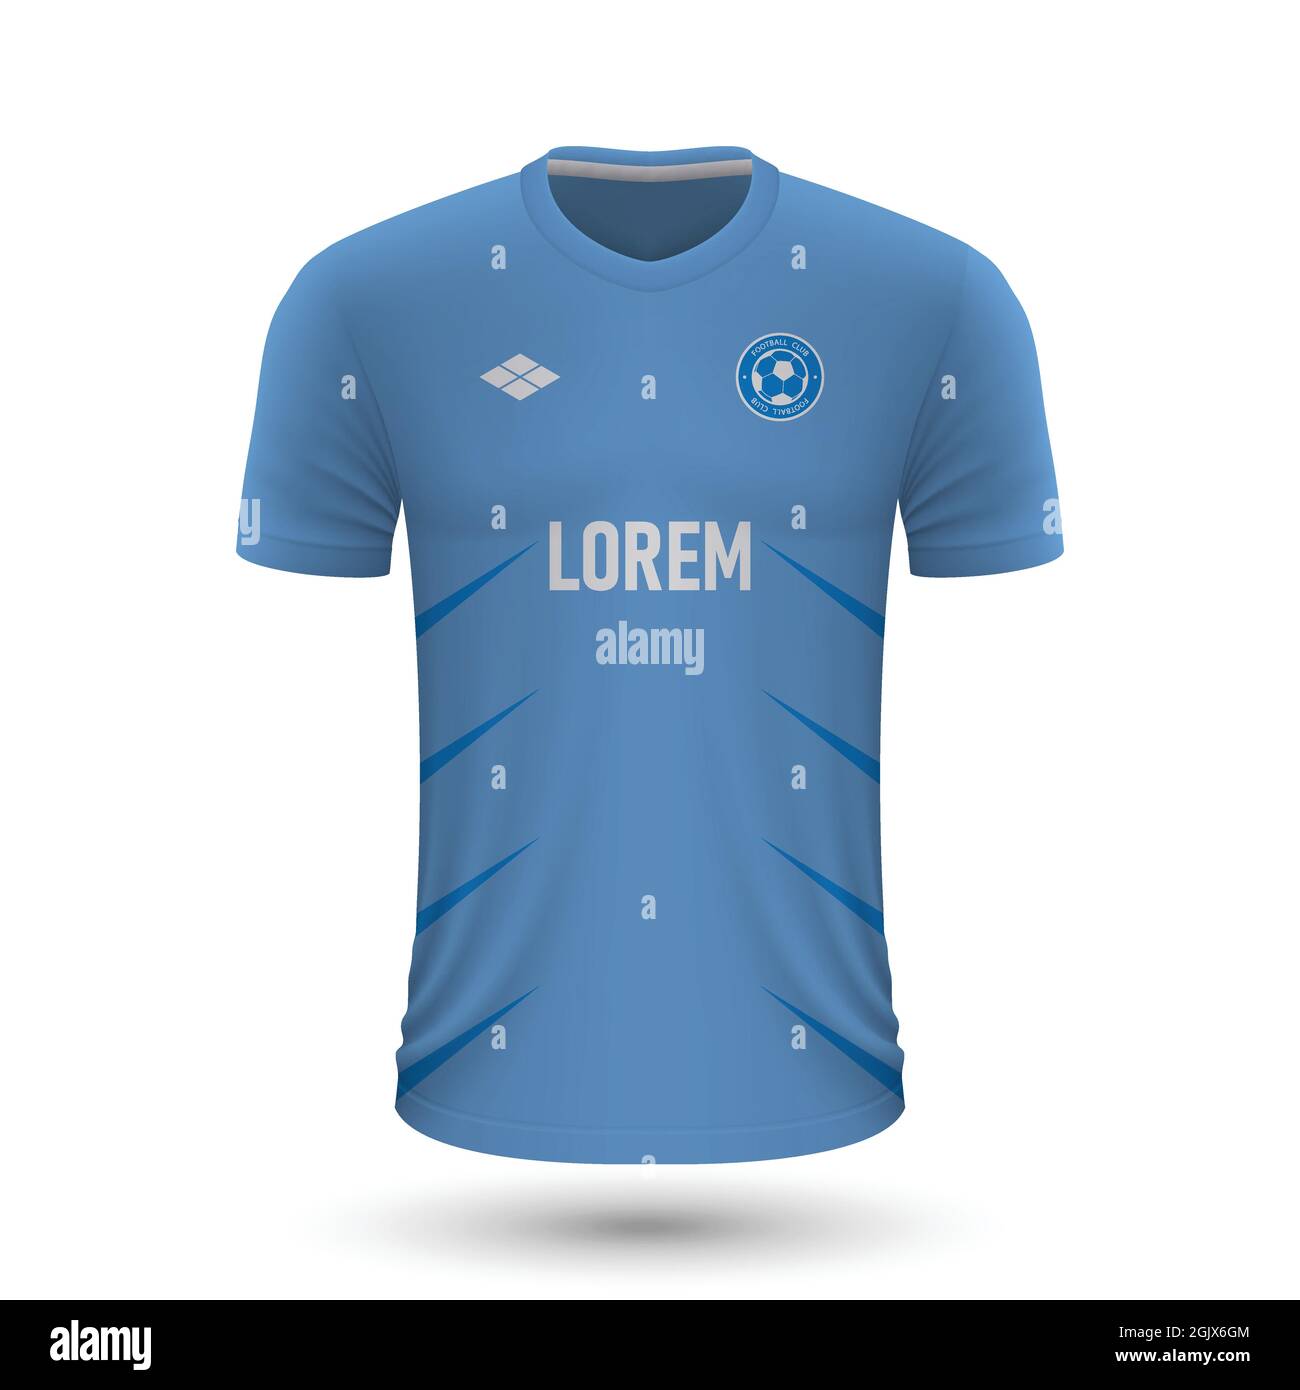 Realistic soccer shirt Malmo 2022, jersey template for football kit. Vector illustration Stock Vector